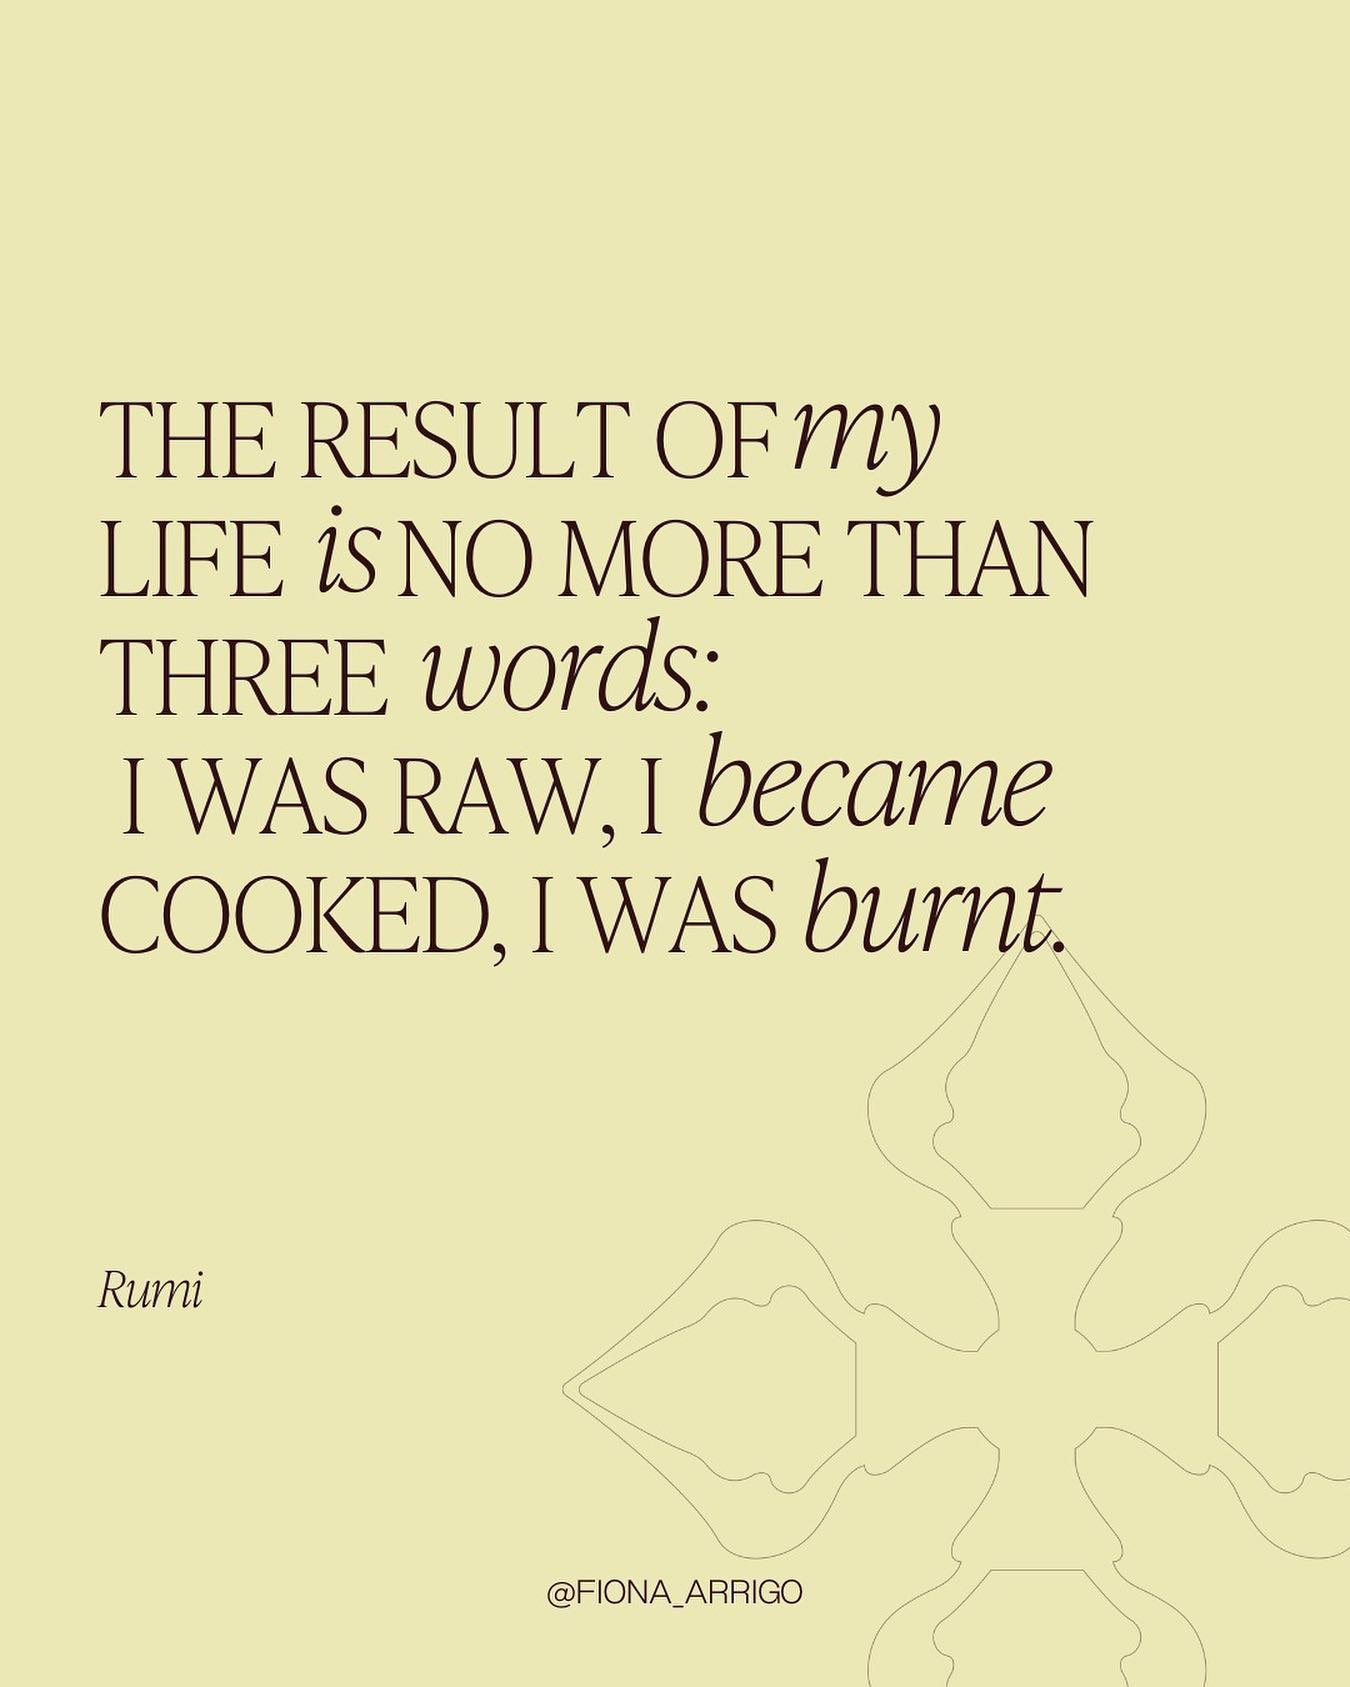 &ldquo;The result of my life is no more than three words: I was raw, I became cooked, I was burnt.&rdquo; &mdash; Rumi

Life is a journey of transformation. We grow through experiences that shape and mature us along the way. 

Sometimes we meet life 